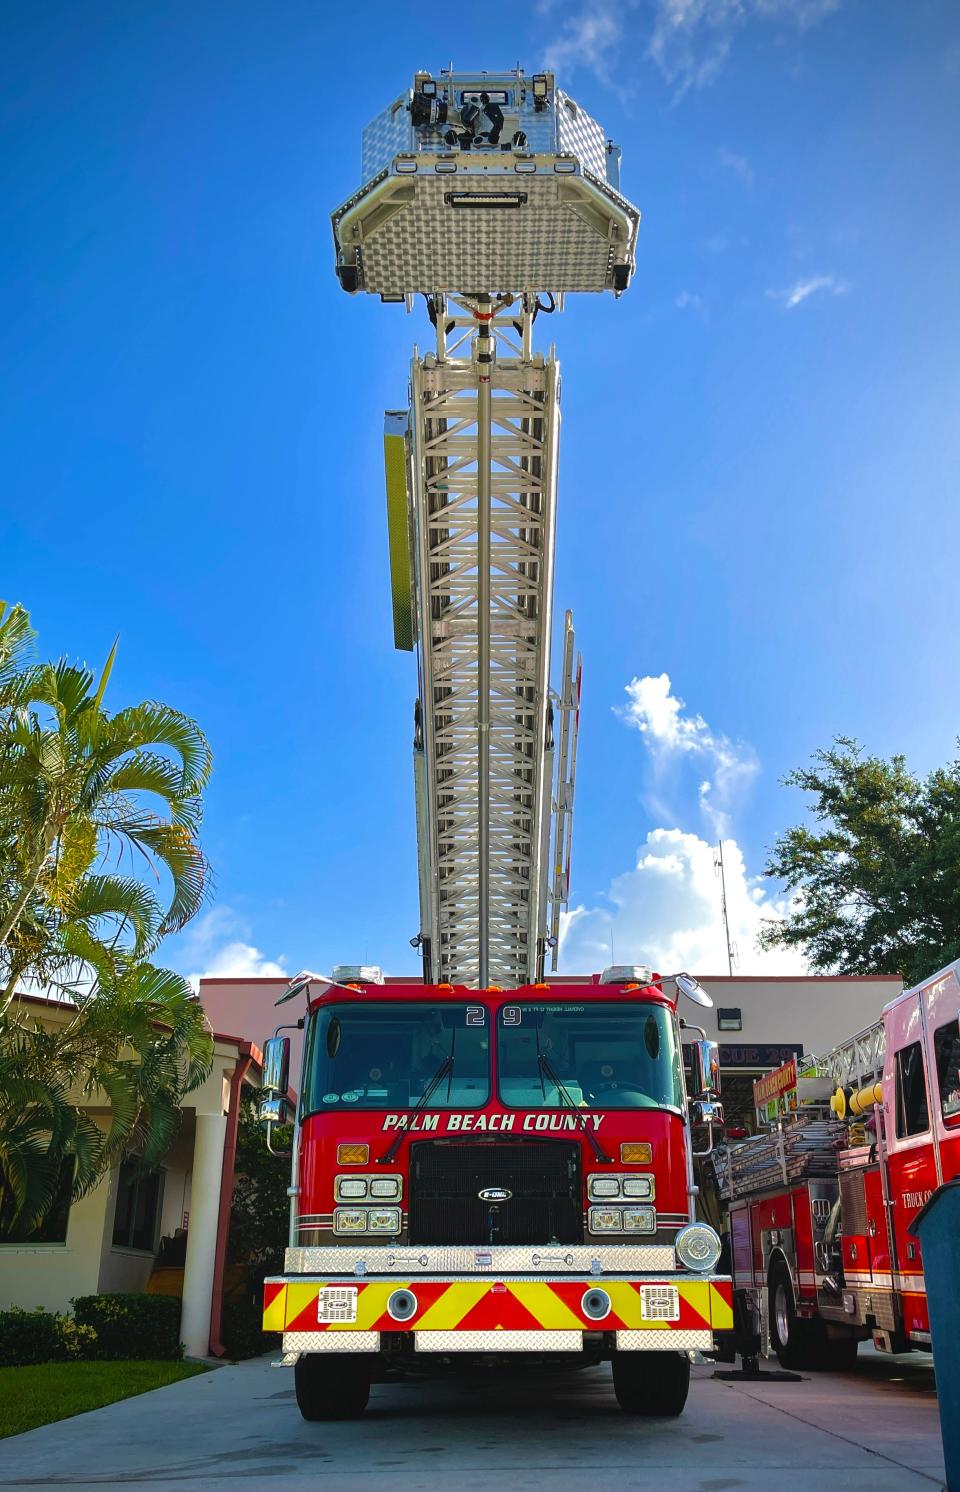 Palm Beach County Fire Rescue rolls out its first 100-foot aerial unit Wednesday morning. It is the tallest aerial unit in the fleet and there are no in-service aerial units taller in the county. Truck 29 reaches higher vertically and extend farther horizontally than any other aerial apparatus in its fleet and carries cutting-edge technology that supports firefighter health and safety initiatives.